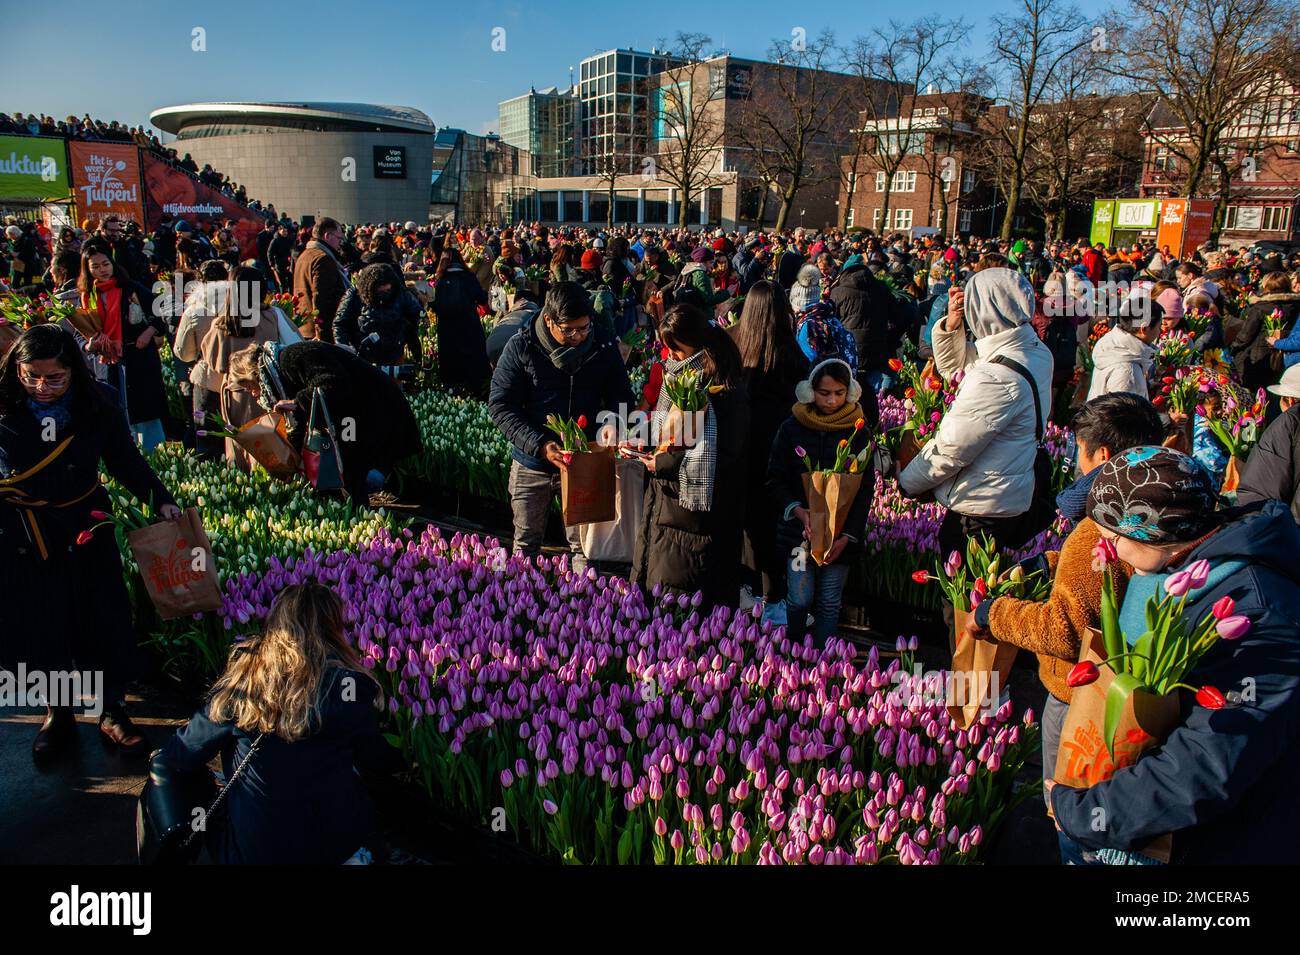 General view of the people having a great time while taking tulips for free. Each year on the 3rd Saturday of January, the National Tulip Day is celebrated in Amsterdam. Dutch tulip growers built a huge picking garden with more than 200,000 colorful tulips at the Museumplein in Amsterdam. Visitors are allowed to pick tulips for free. The event was opened by Olympic skating champion, Irene Schouten. Prior to the opening, she christened a new tulip: Tulipa 'Dutch Pearl' as a reference to the world - famous painting 'The girl with a pearl earring' by Johannes Vermeer. Stock Photo